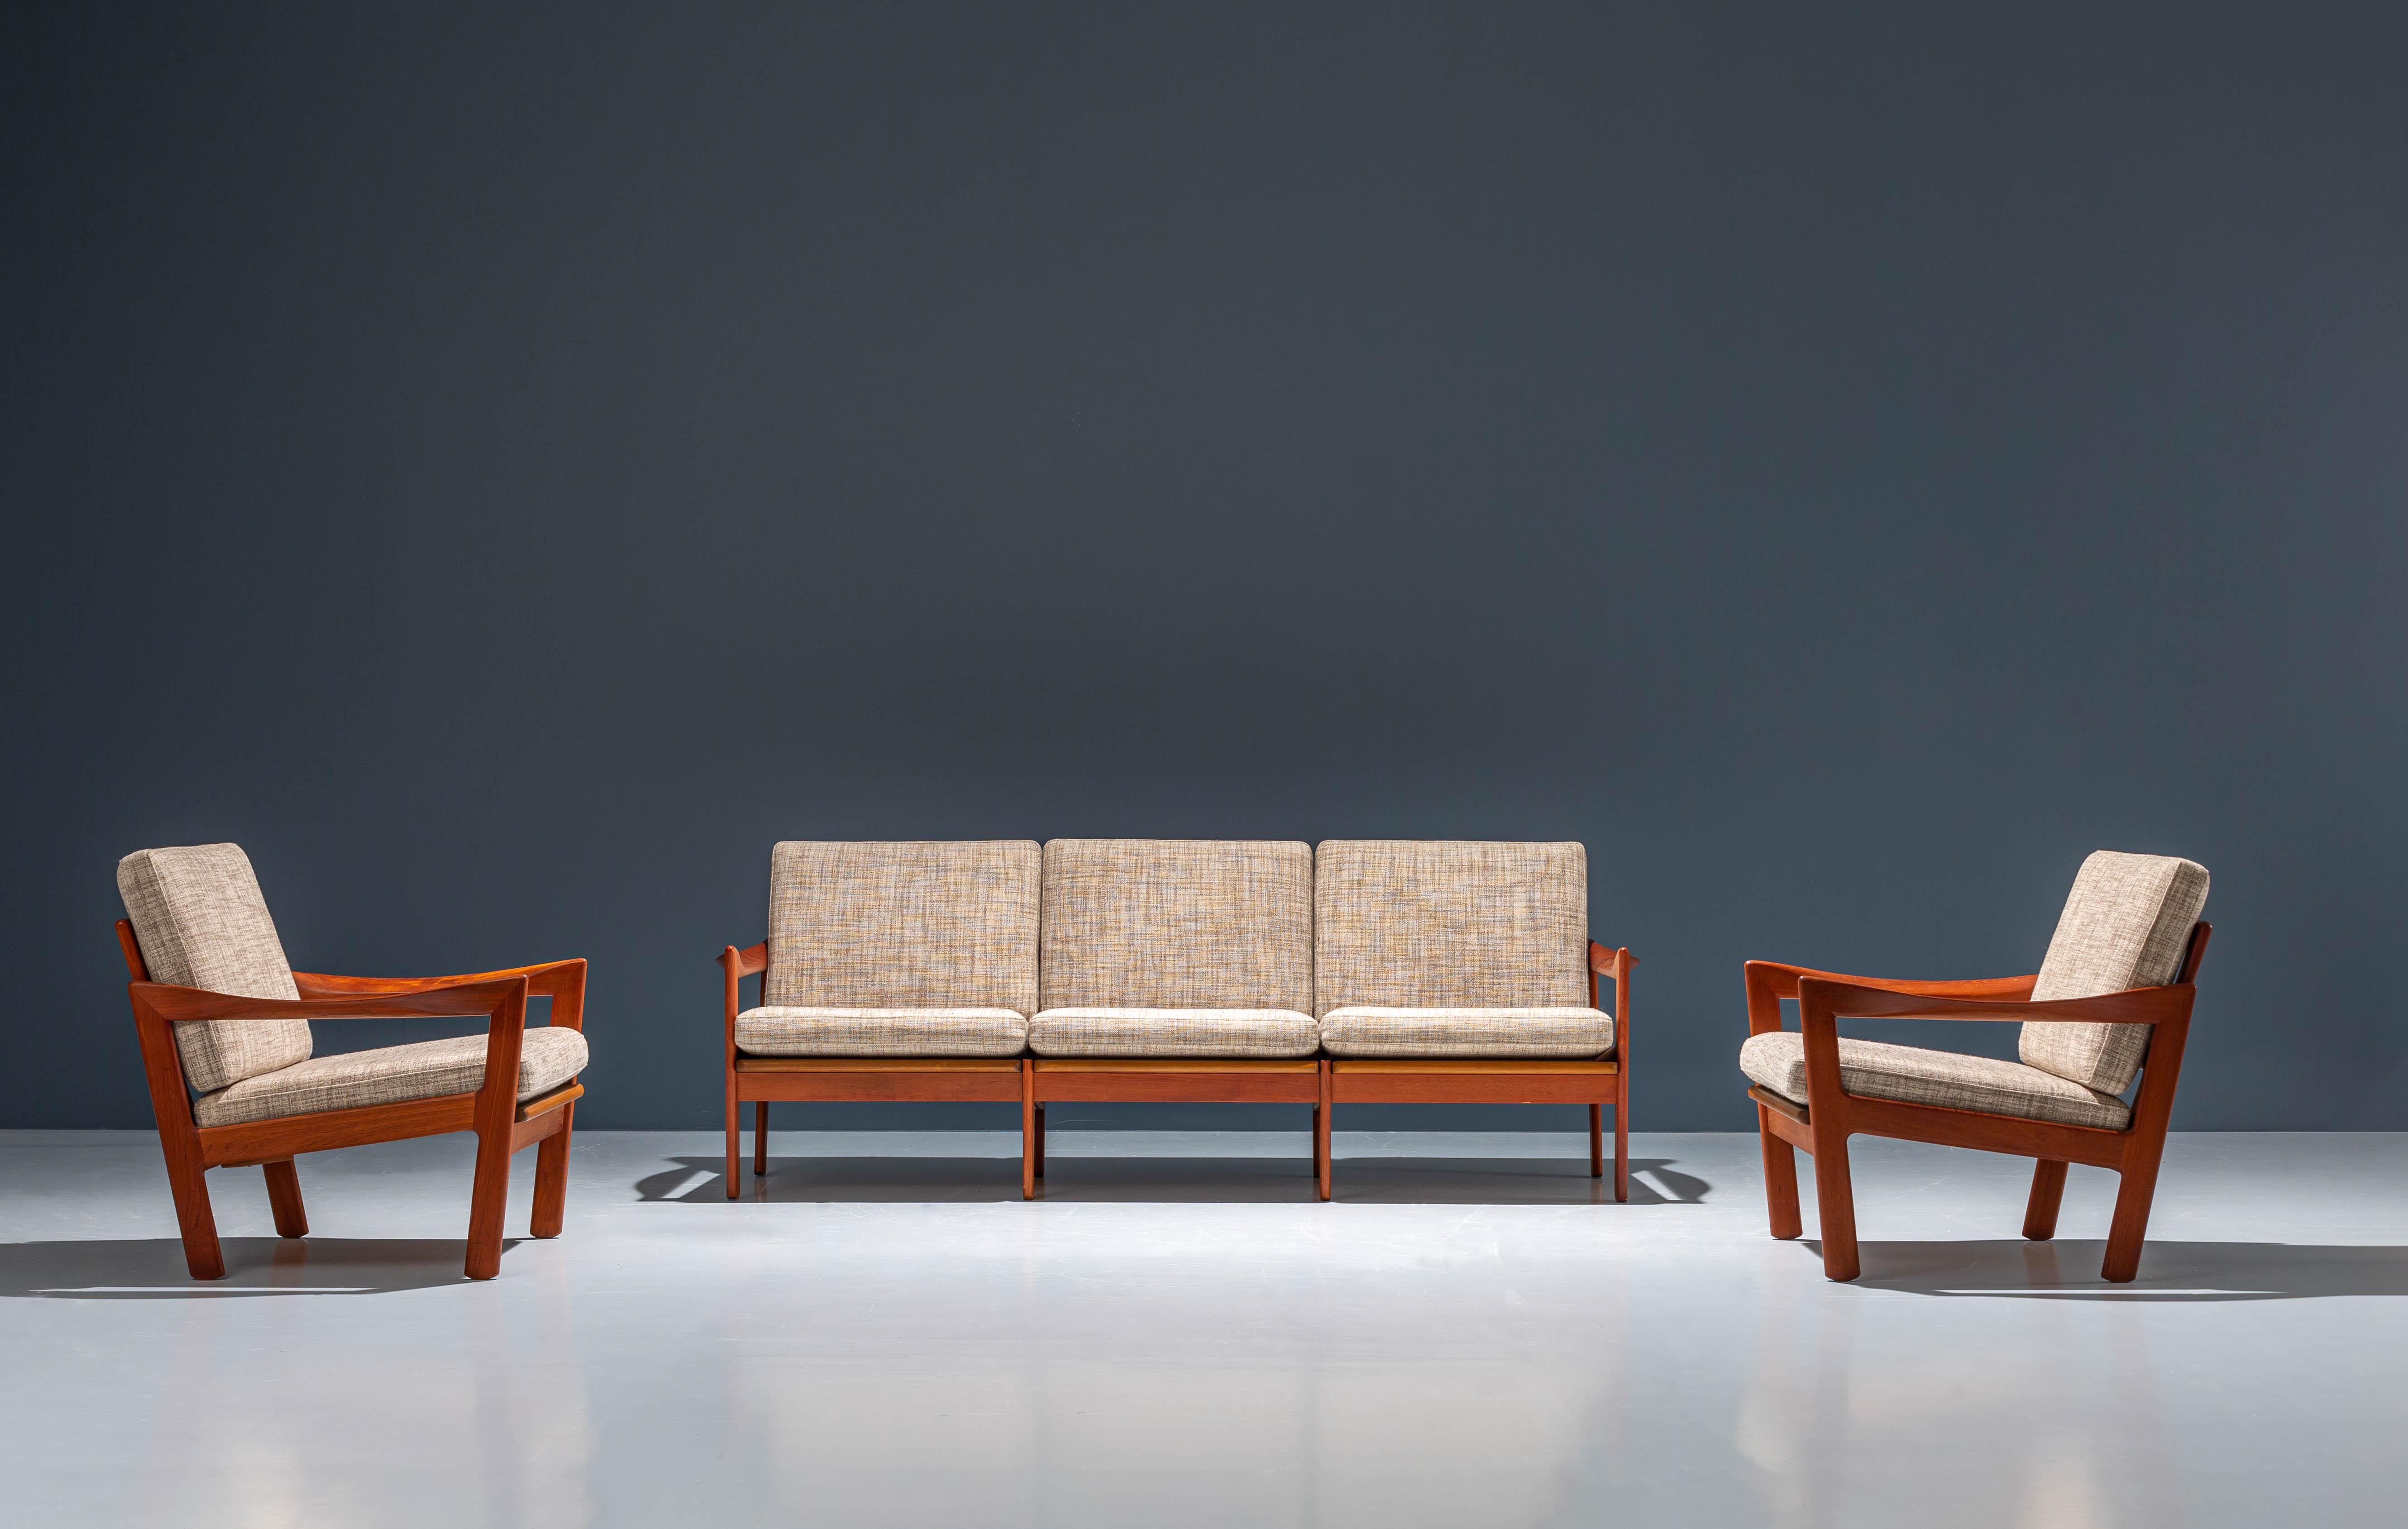 Set of two Loungechairs and one 3-seat Sofa by Illum Wikkelsø for Niels Eilersen in teak and fabric. The fabric is still in very good condition, clean and crisp and the teakwood is very shiny and vibrant. A luxurious living room set full of